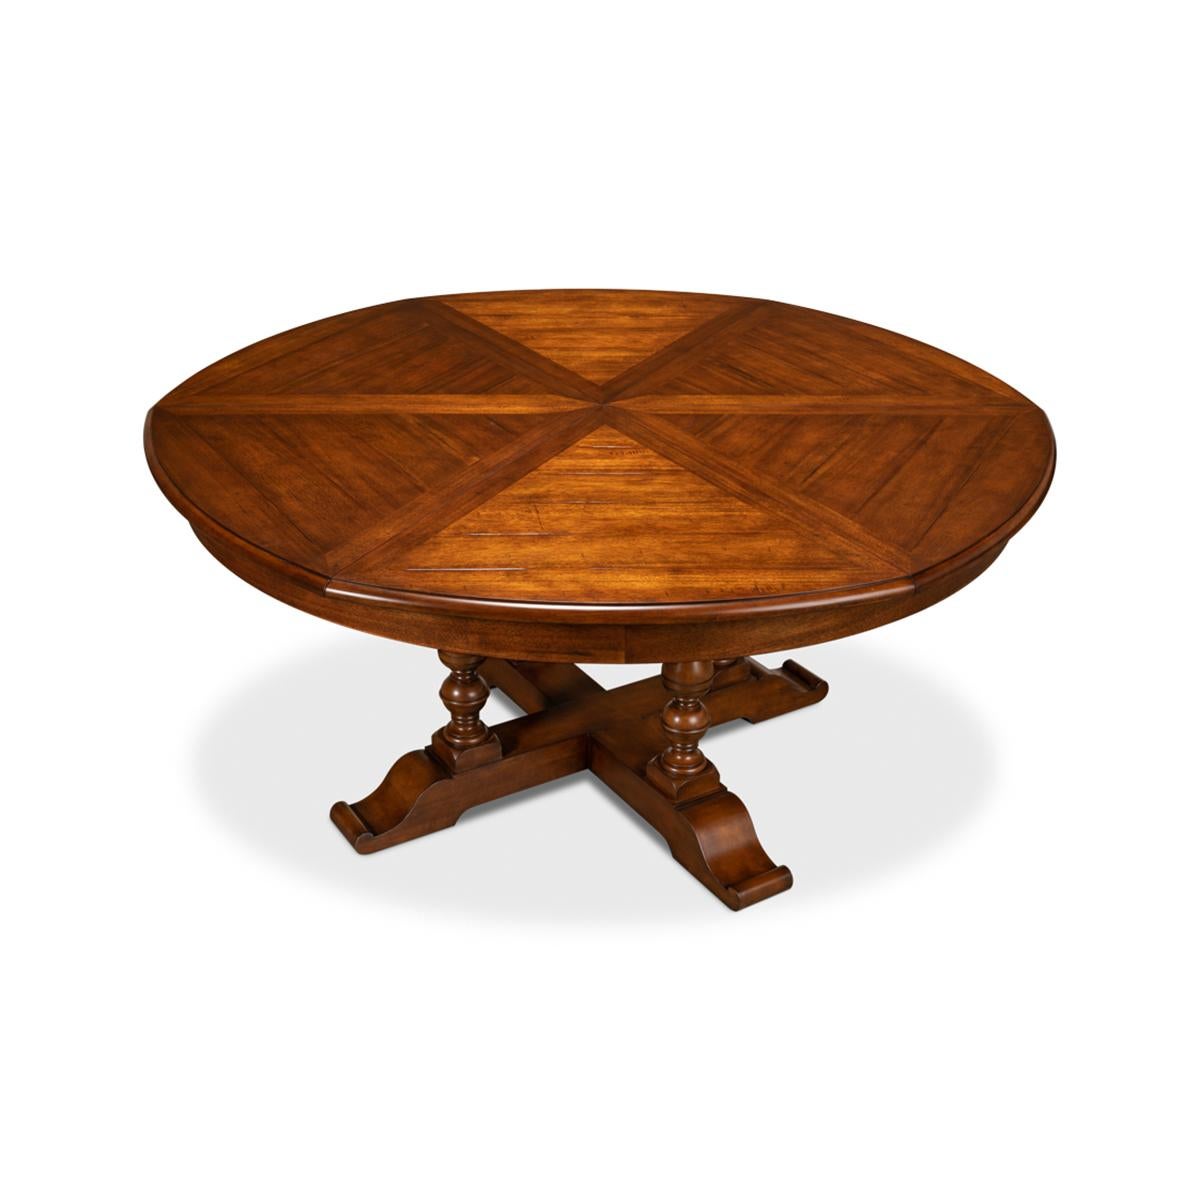 Contemporary Early English Style Round Extension Dining Table - 84